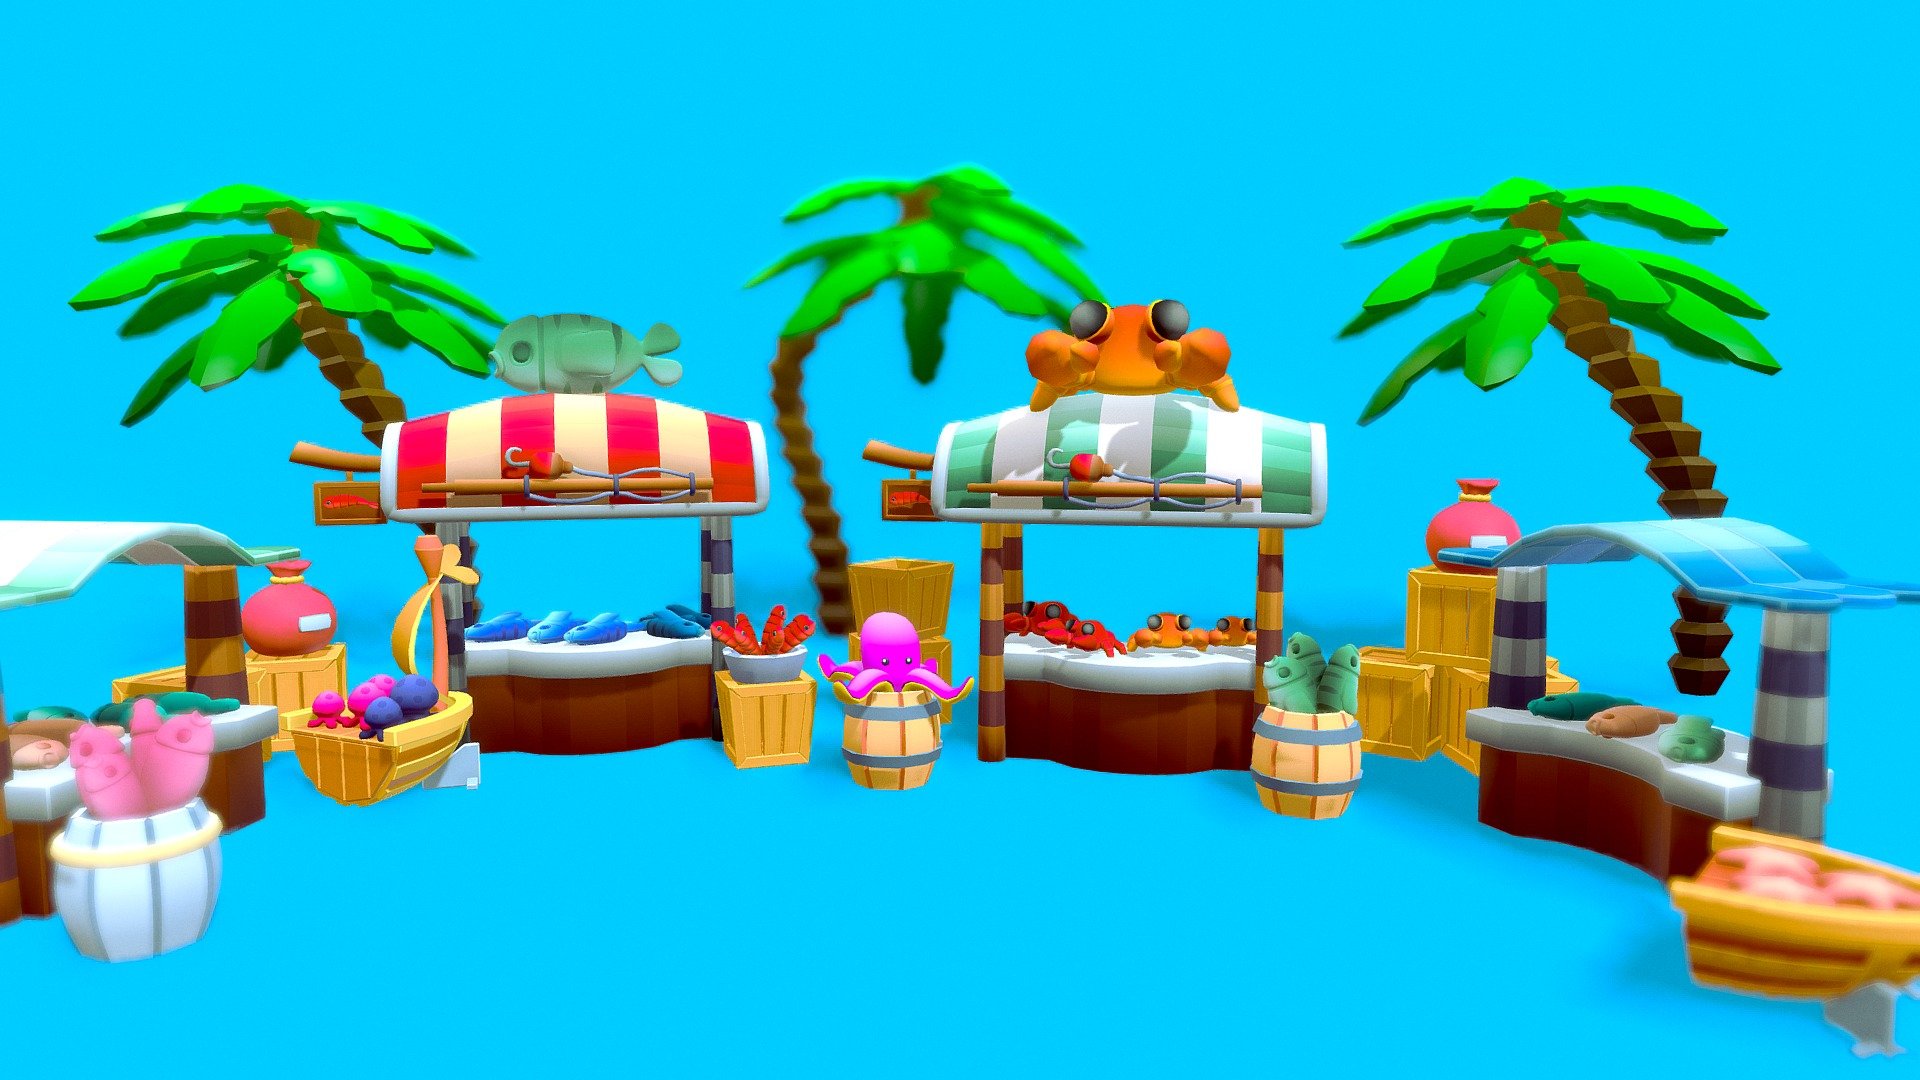 Stylize fish market modeled and textured in blender 3d model